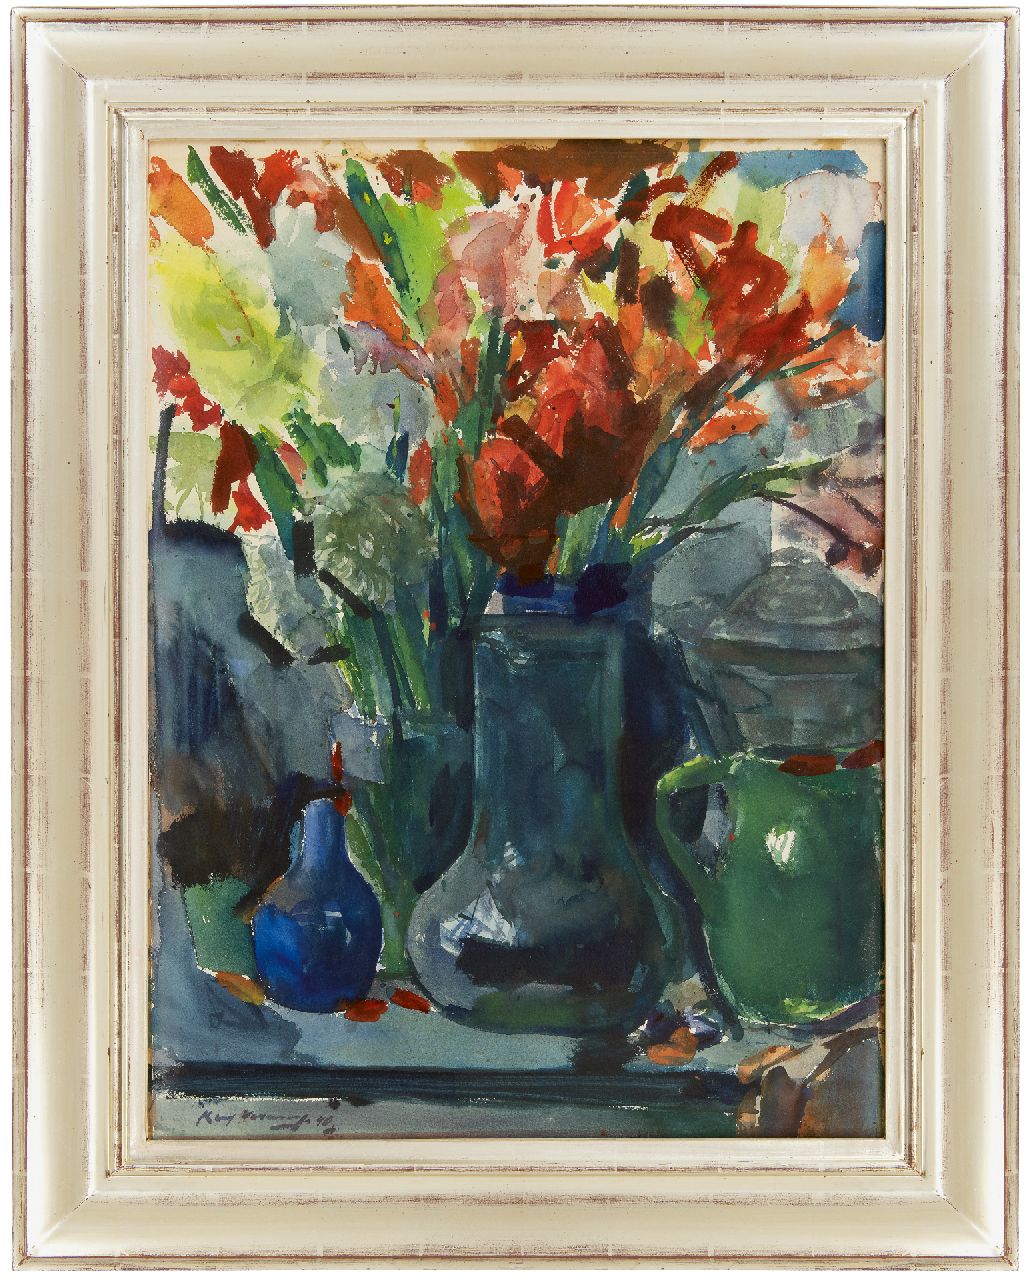 Verwey K.  | Kees Verwey | Watercolours and drawings offered for sale | A still life with Gladiolus, watercolour on paper 74.0 x 55.0 cm, signed l.l. and dated '48